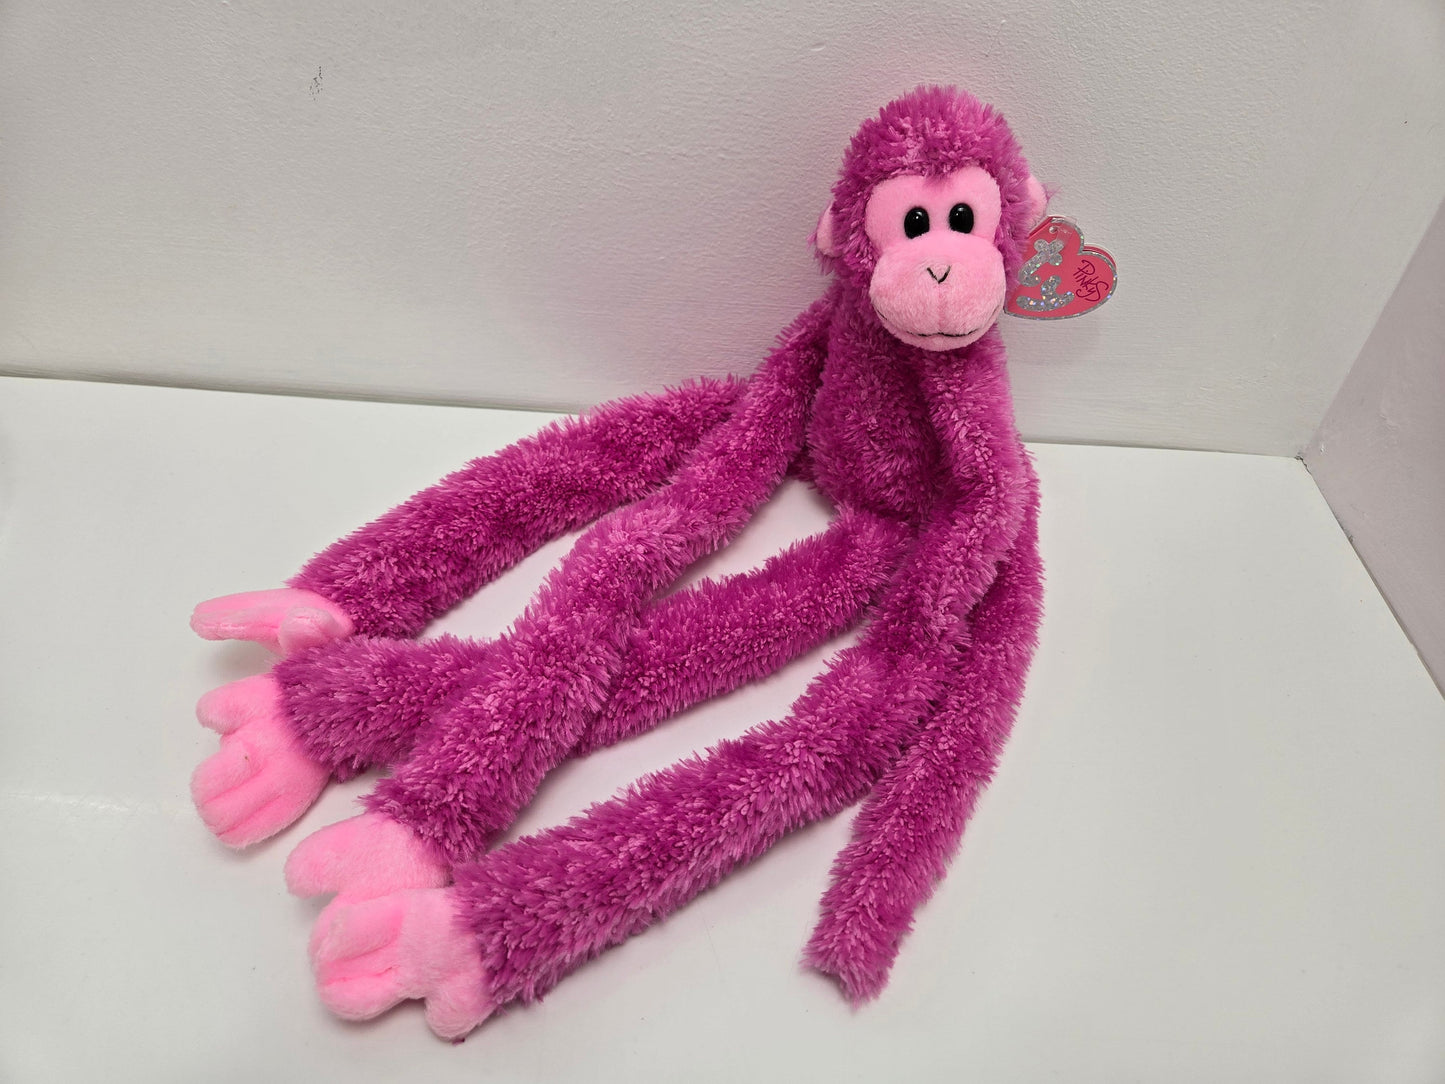 TY Pinkys “Hug Me” the Love Monkey - Pinkys Collection (17 inch)